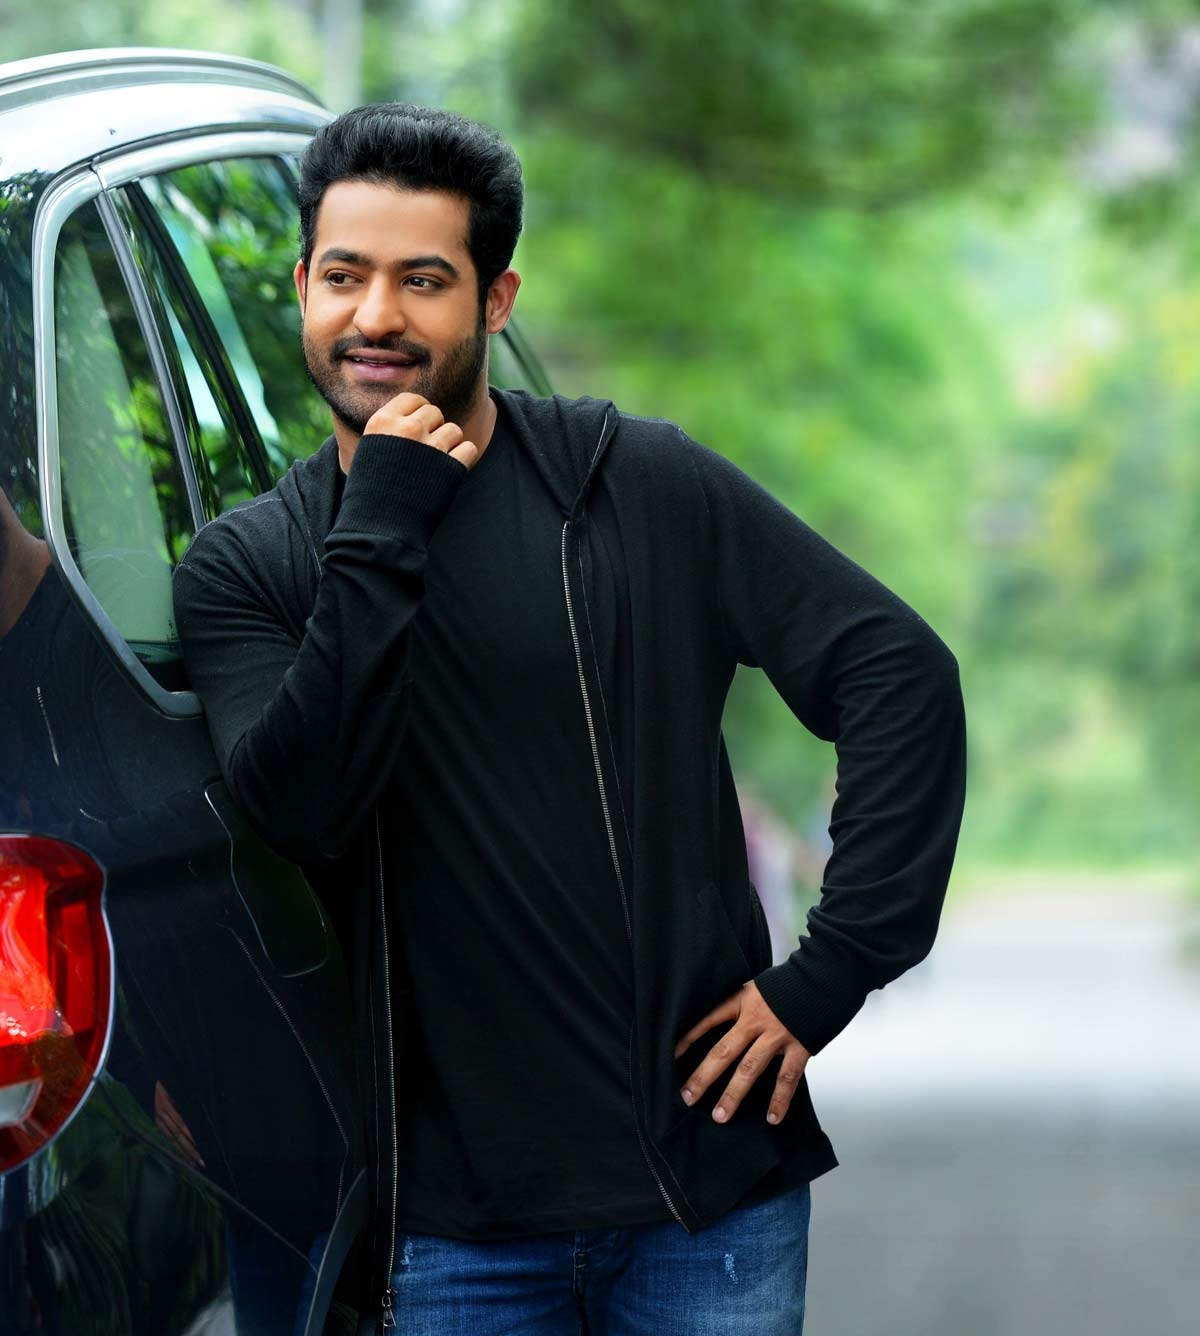 Jr NTR undergoes minor surgery - find out more